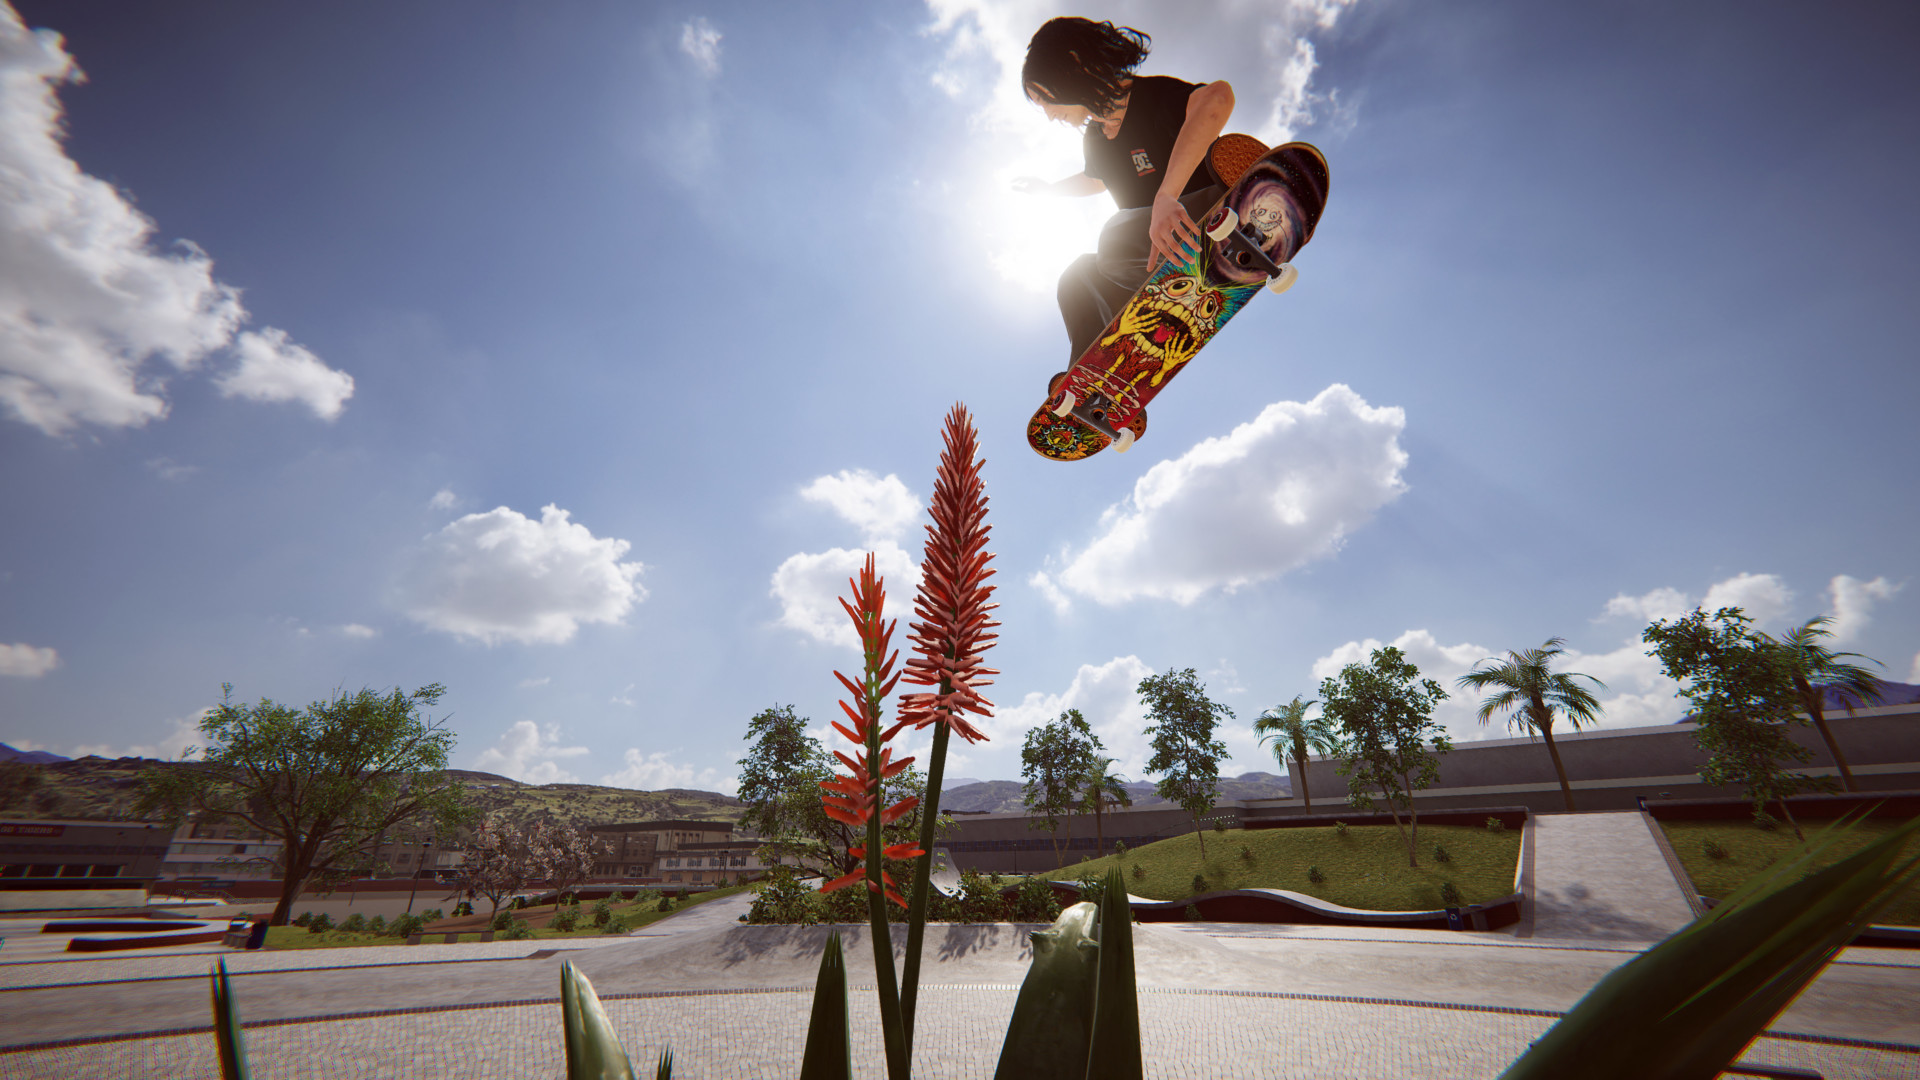 Skater XL coming to Xbox One in July